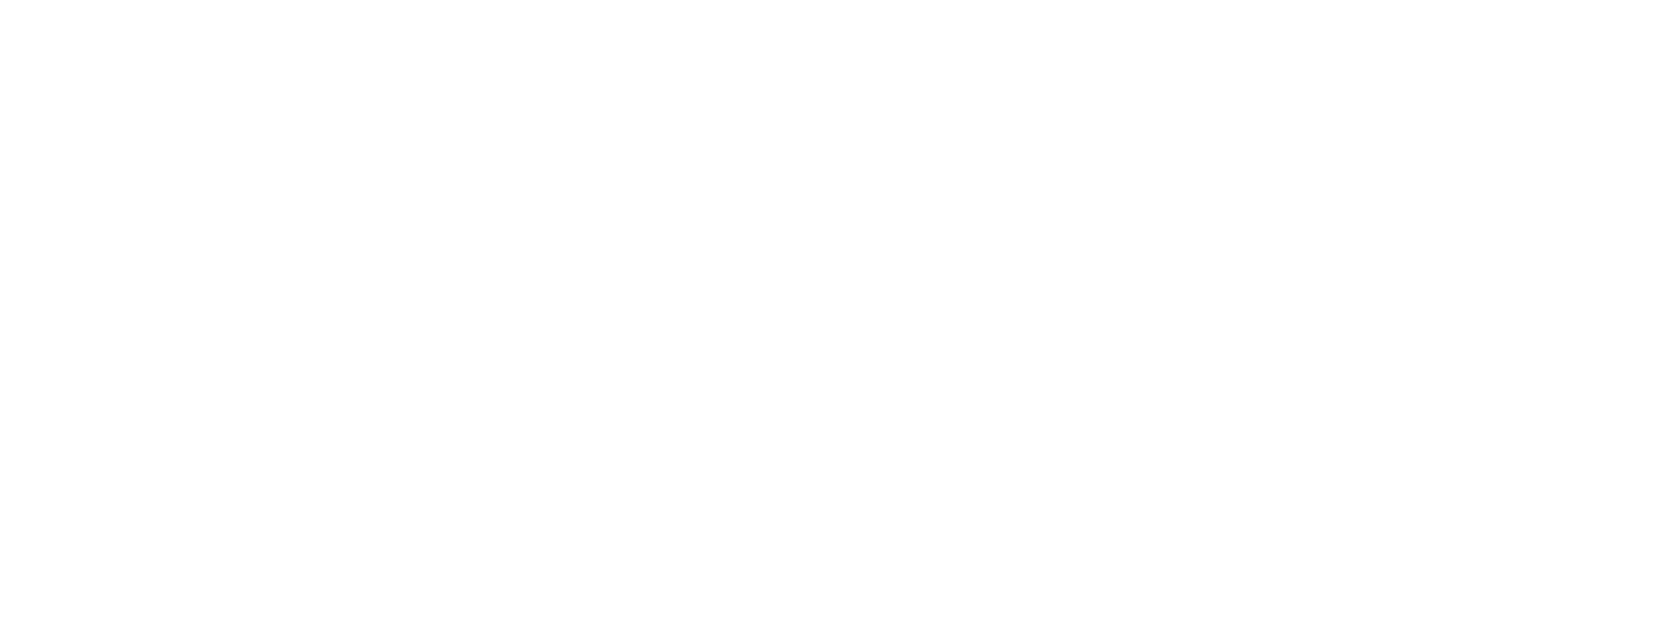 https://www.saastock.com/wp-content/uploads/2021/09/aircall_logo_white_rgb.png